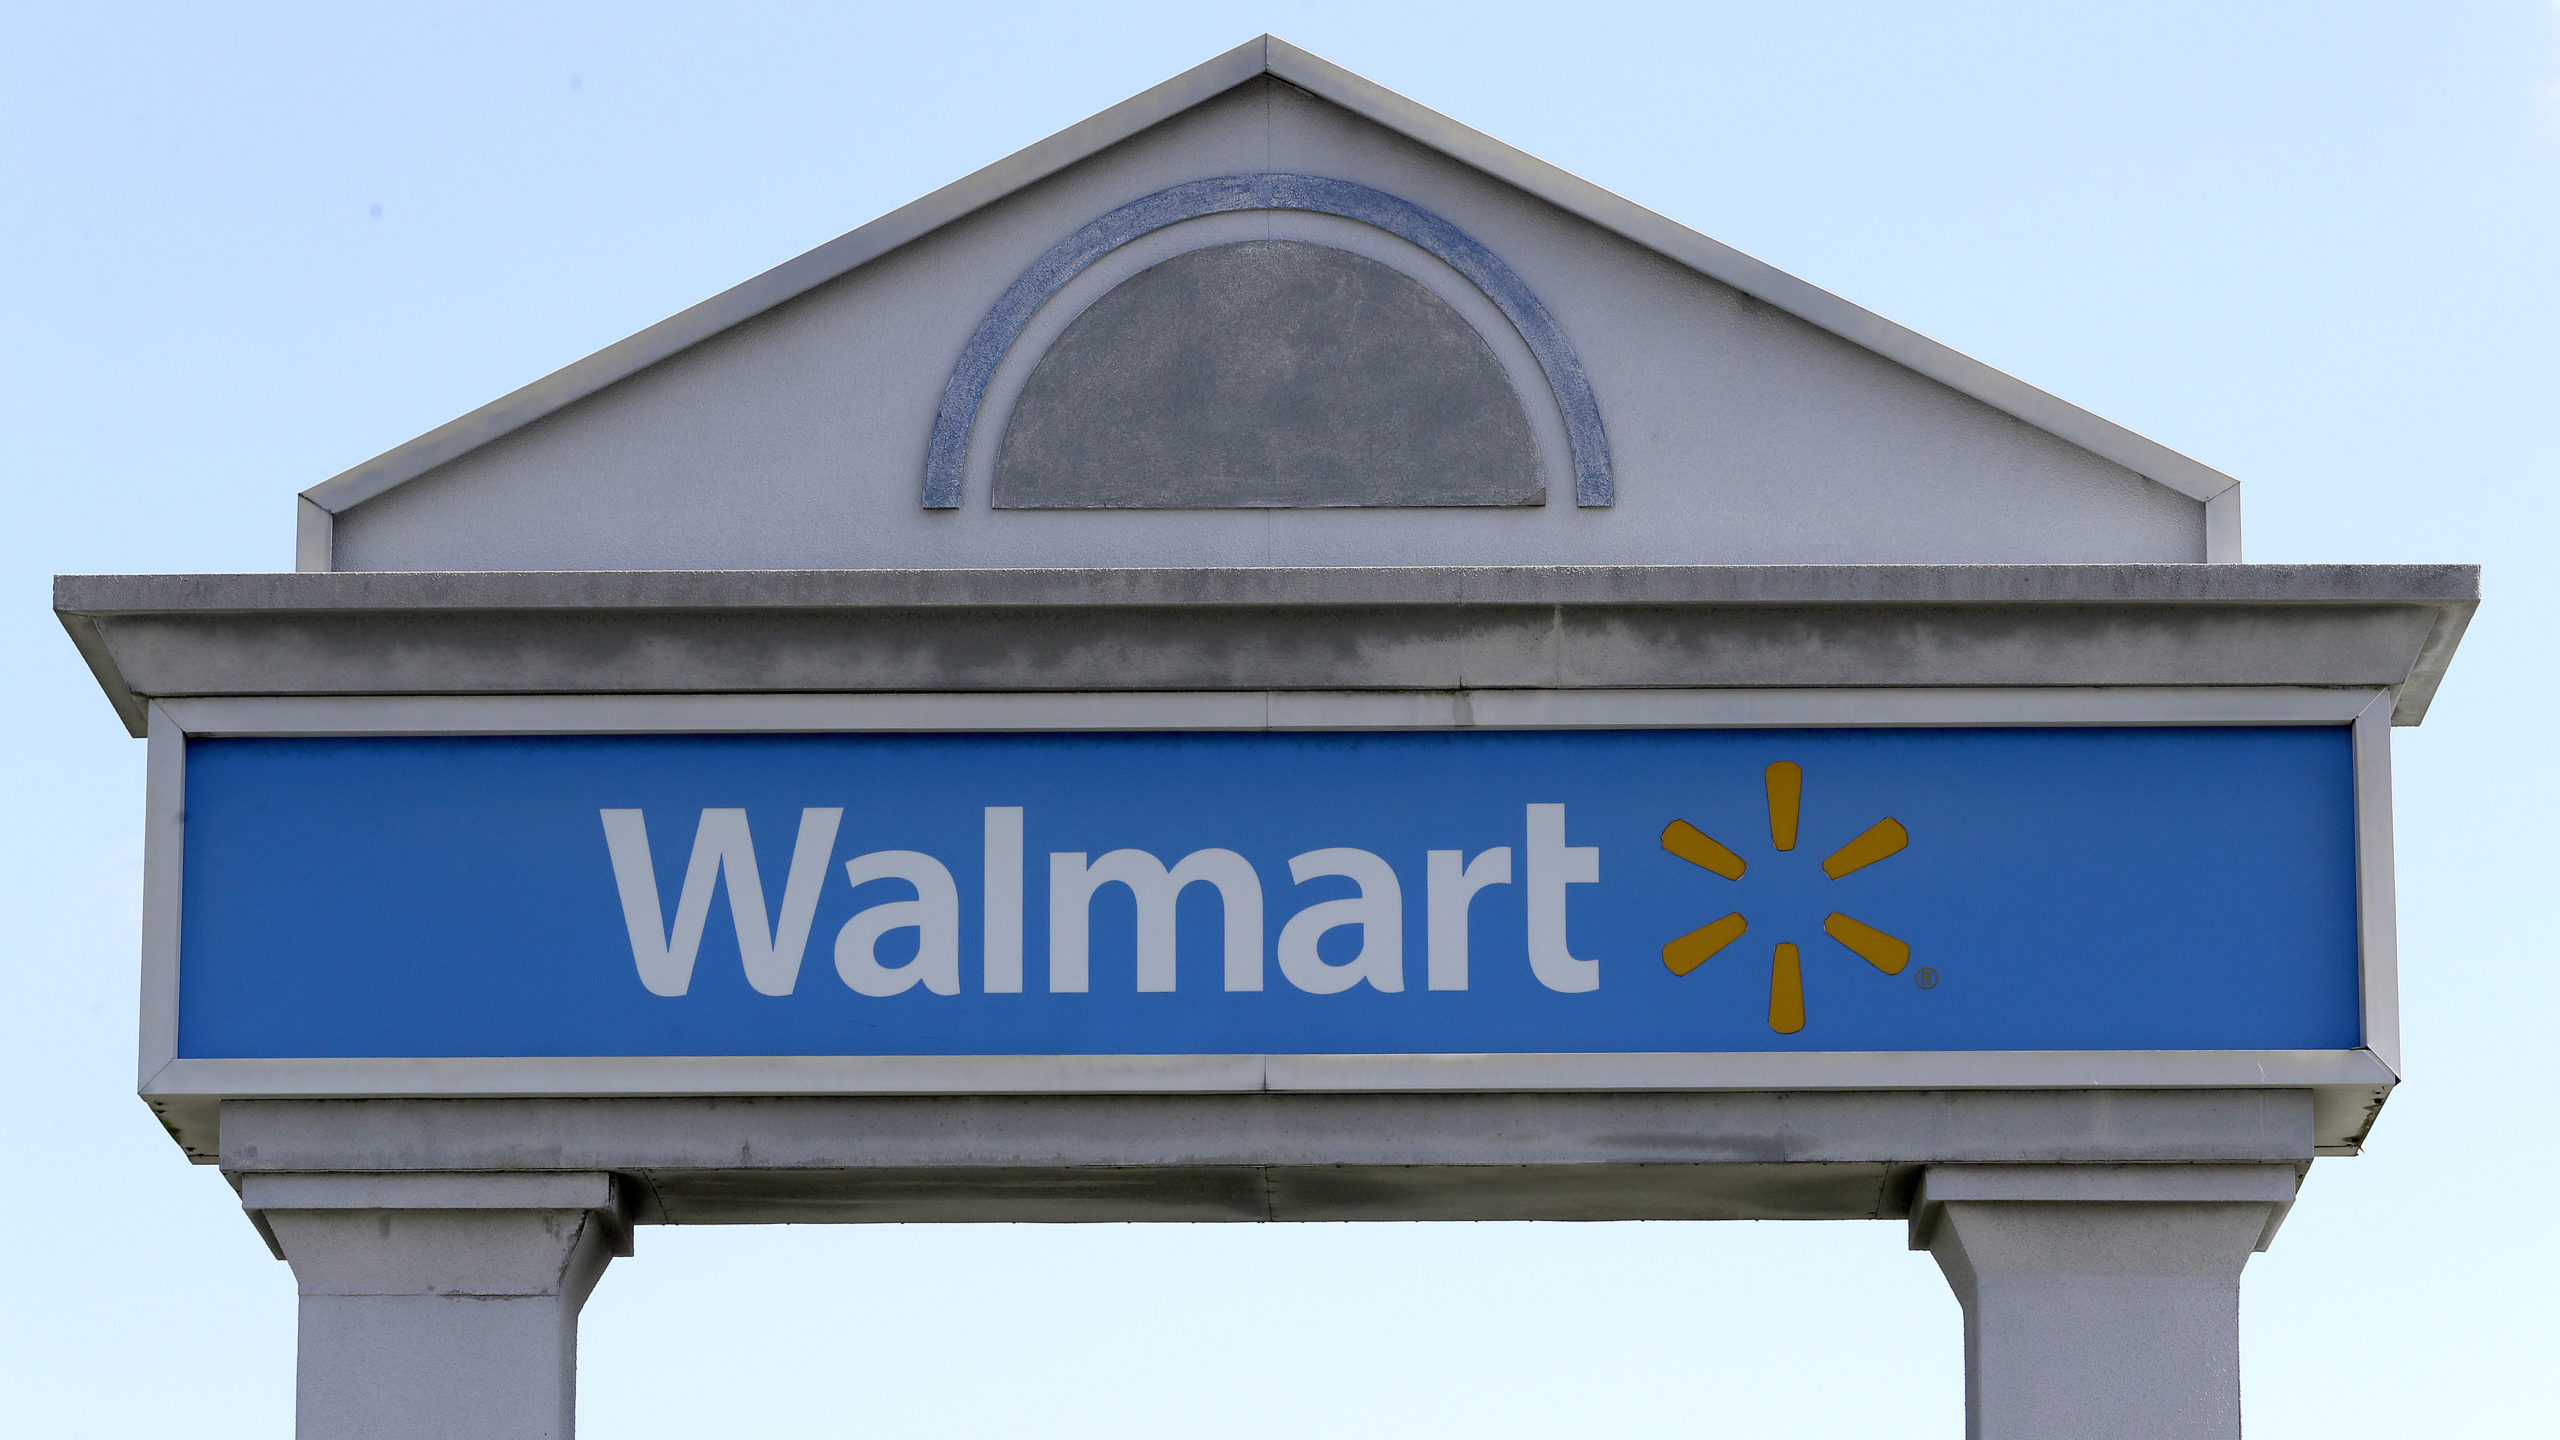 Walmart hiring employees without college degrees for high-paying jobs [Video]